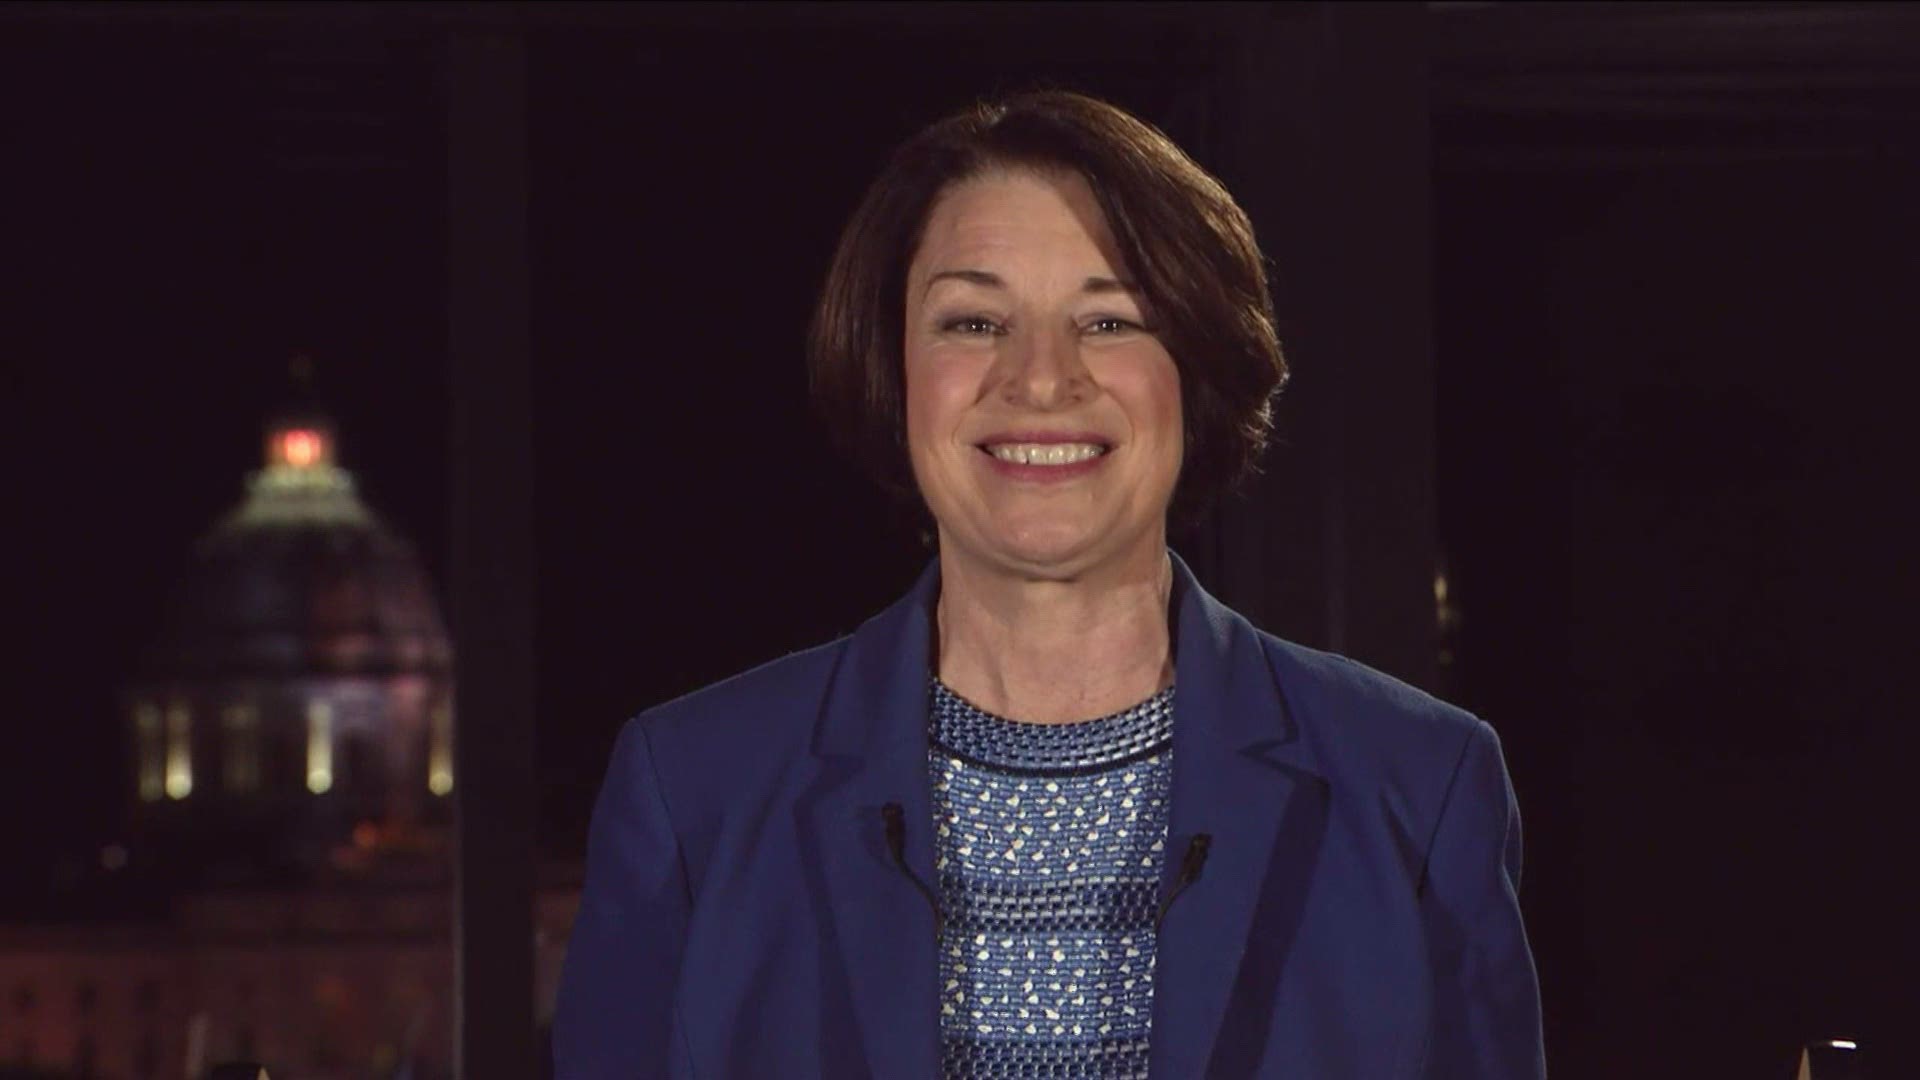 Senator Amy Klobuchar said the day she ended her campaign was a 'moment of great day' because that was also when she endorsed Joe Biden.